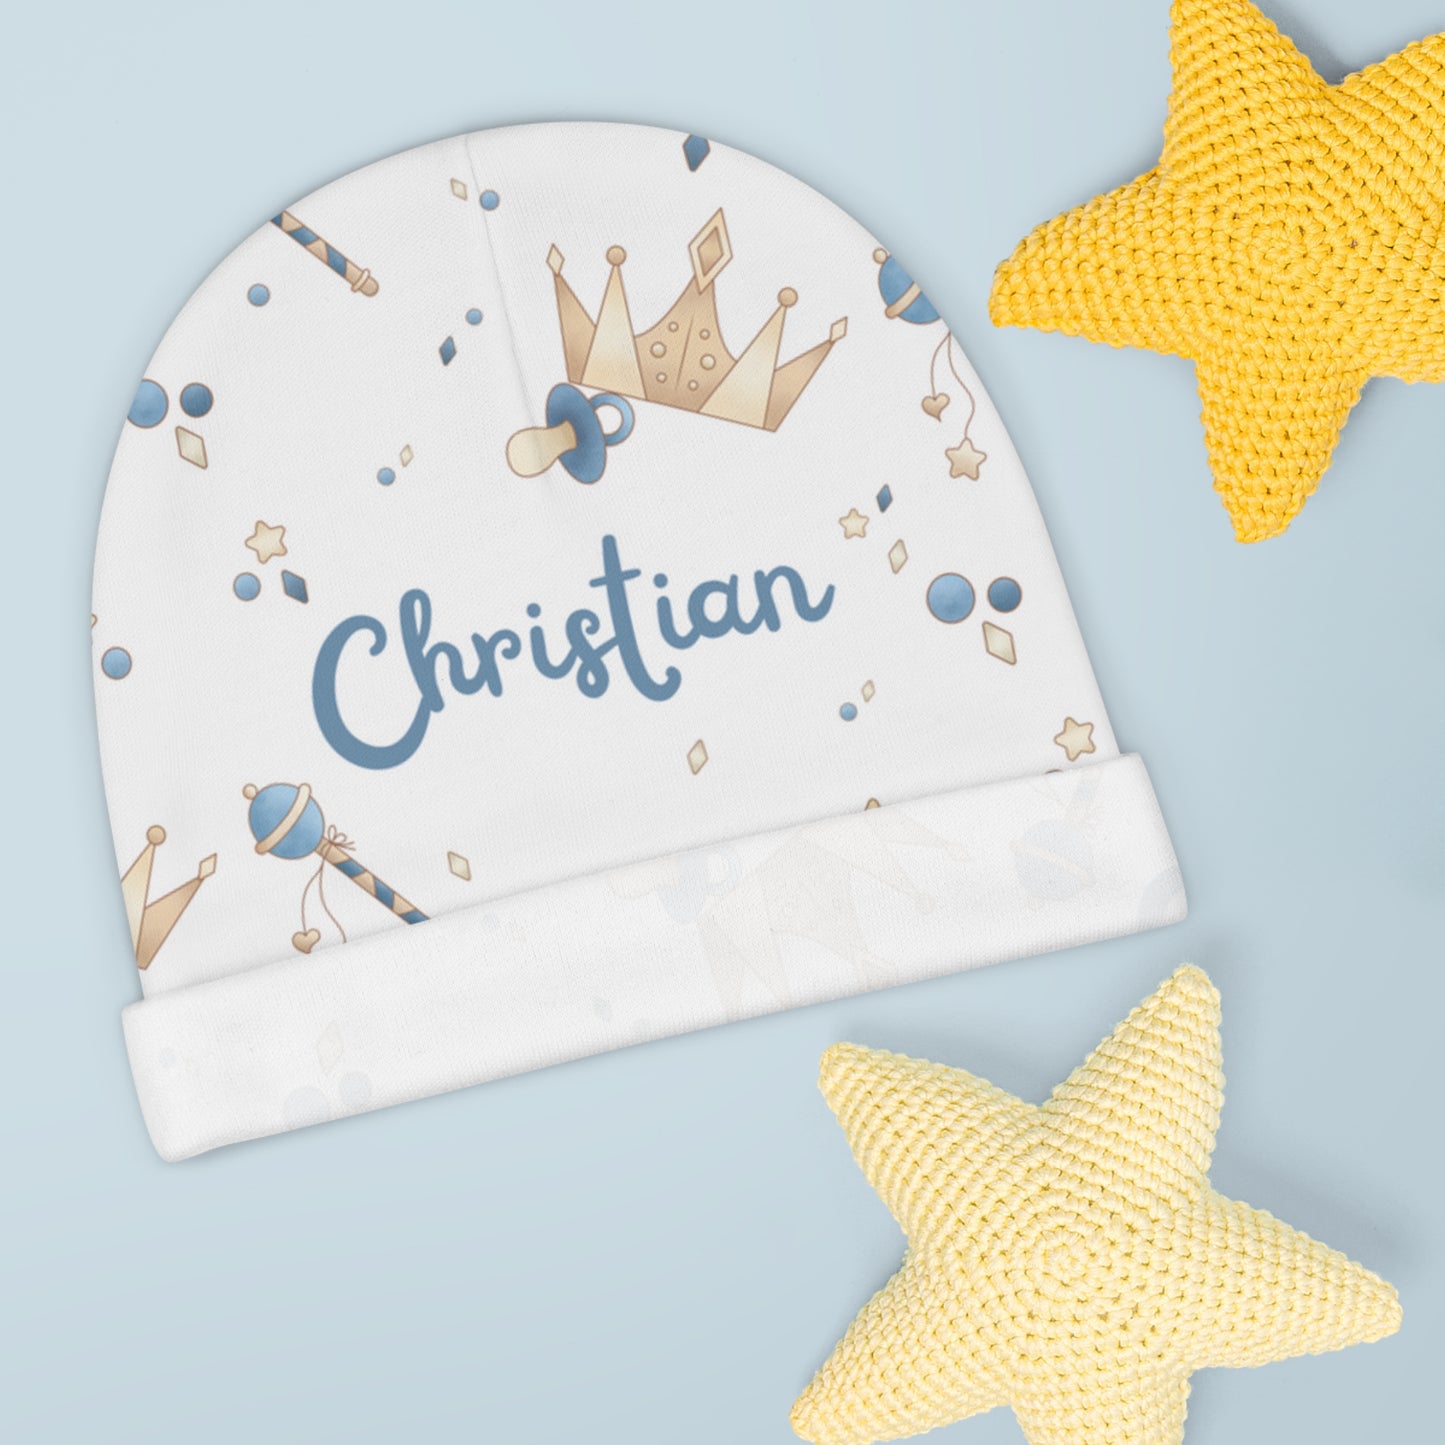 Royal Heirloom Personalized Baby Beanie